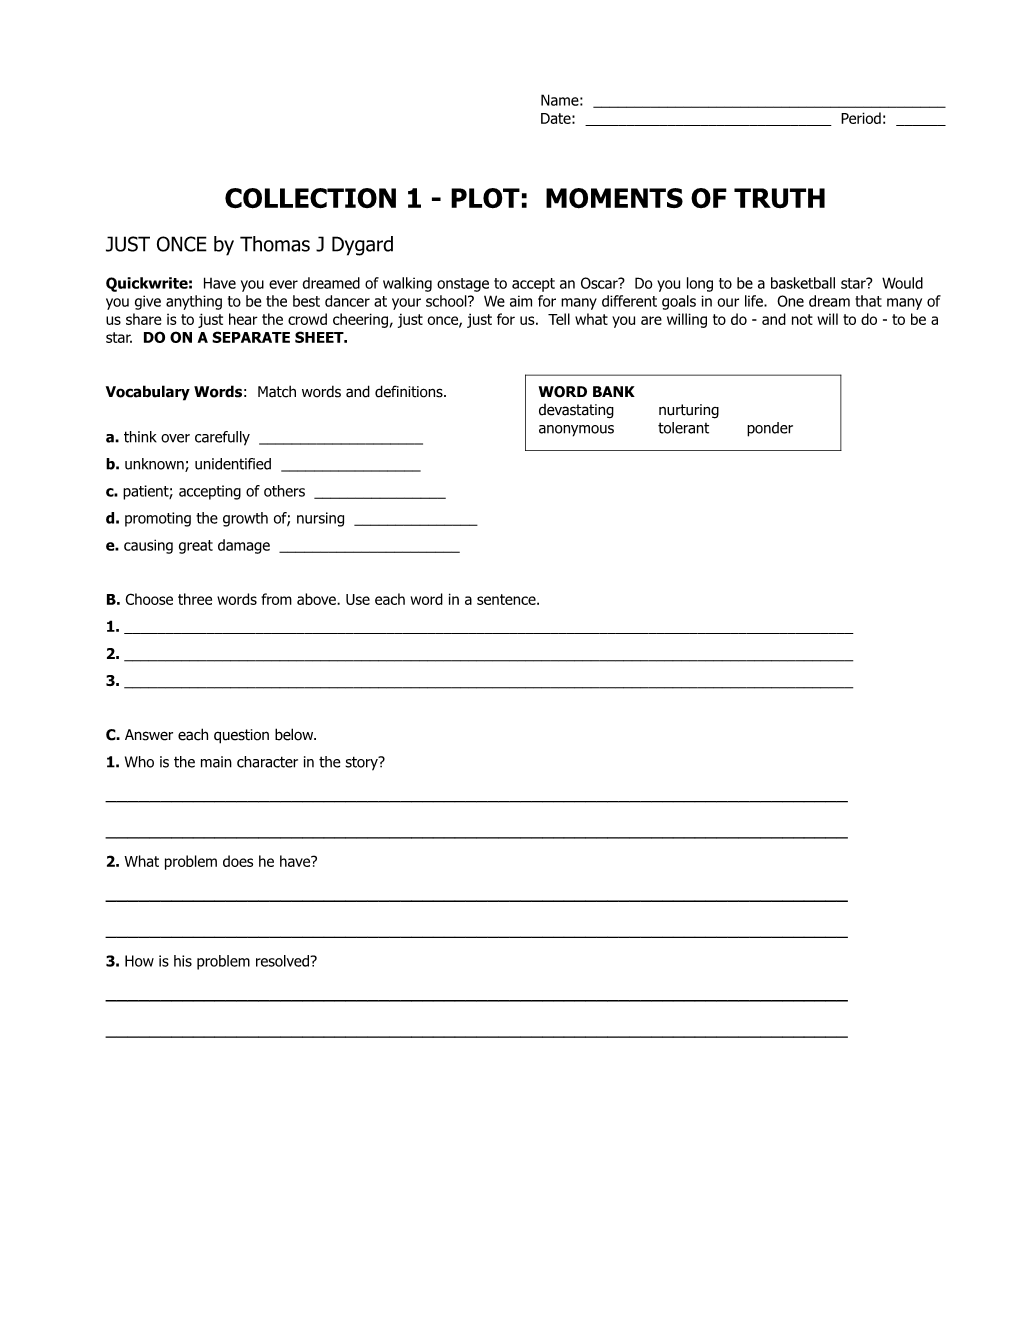 Collection 1: Plot: Moments of Truth